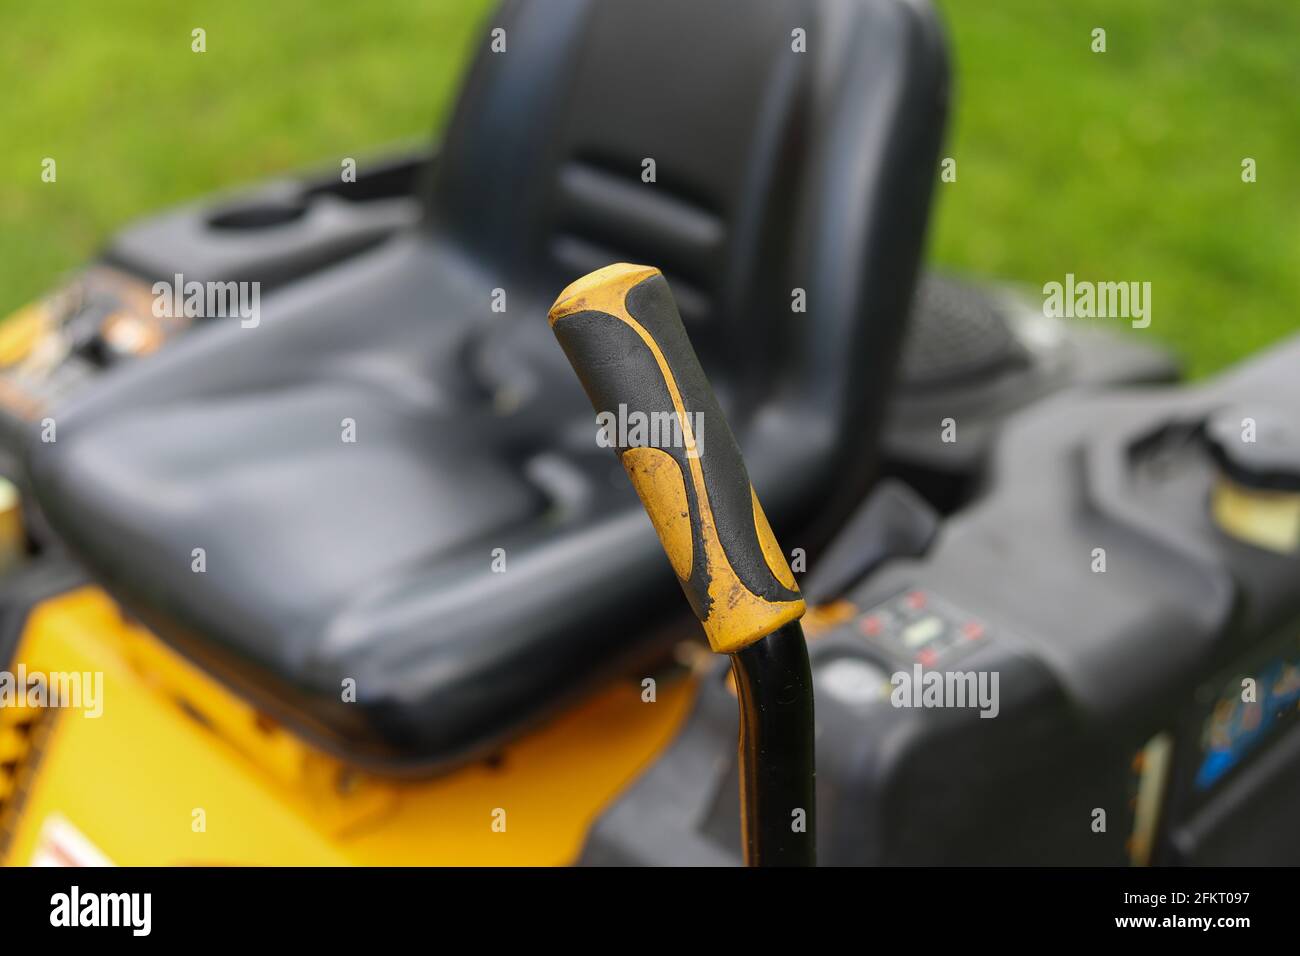 A close up of a handle on a lawn mower Stock Photo